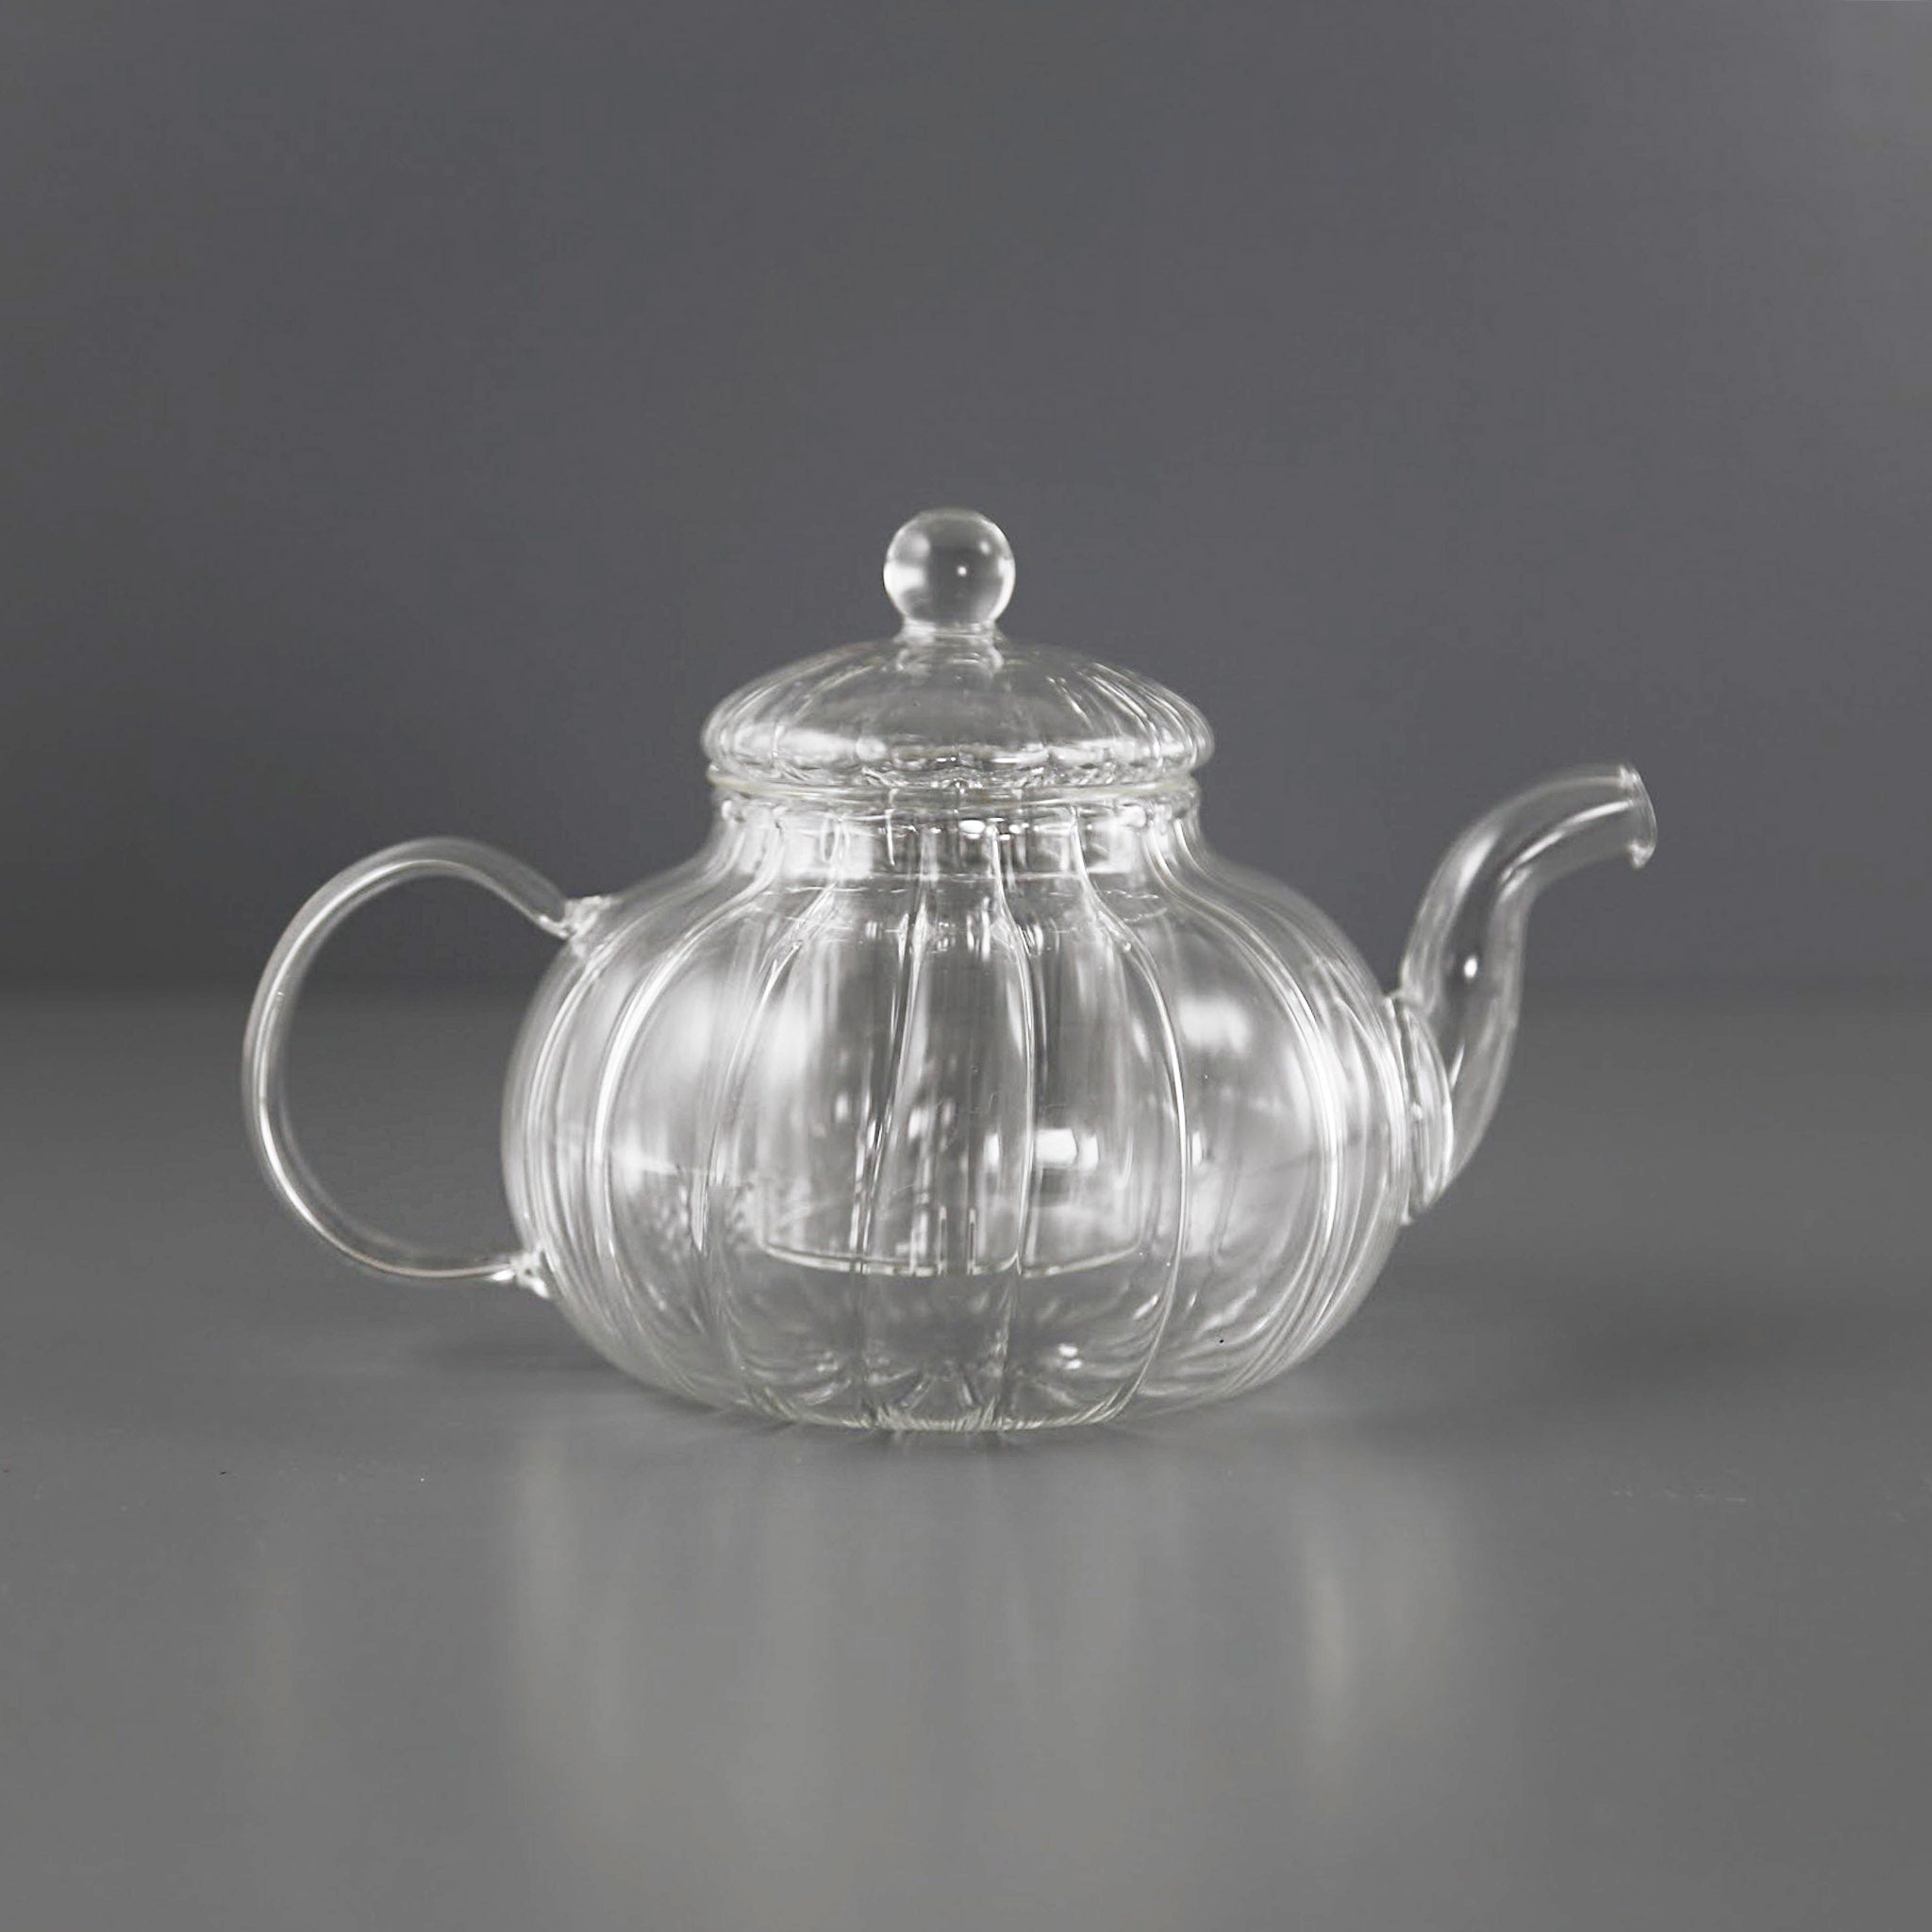 Glass Teapot With Water Steam Infuser – Umi Tea Sets